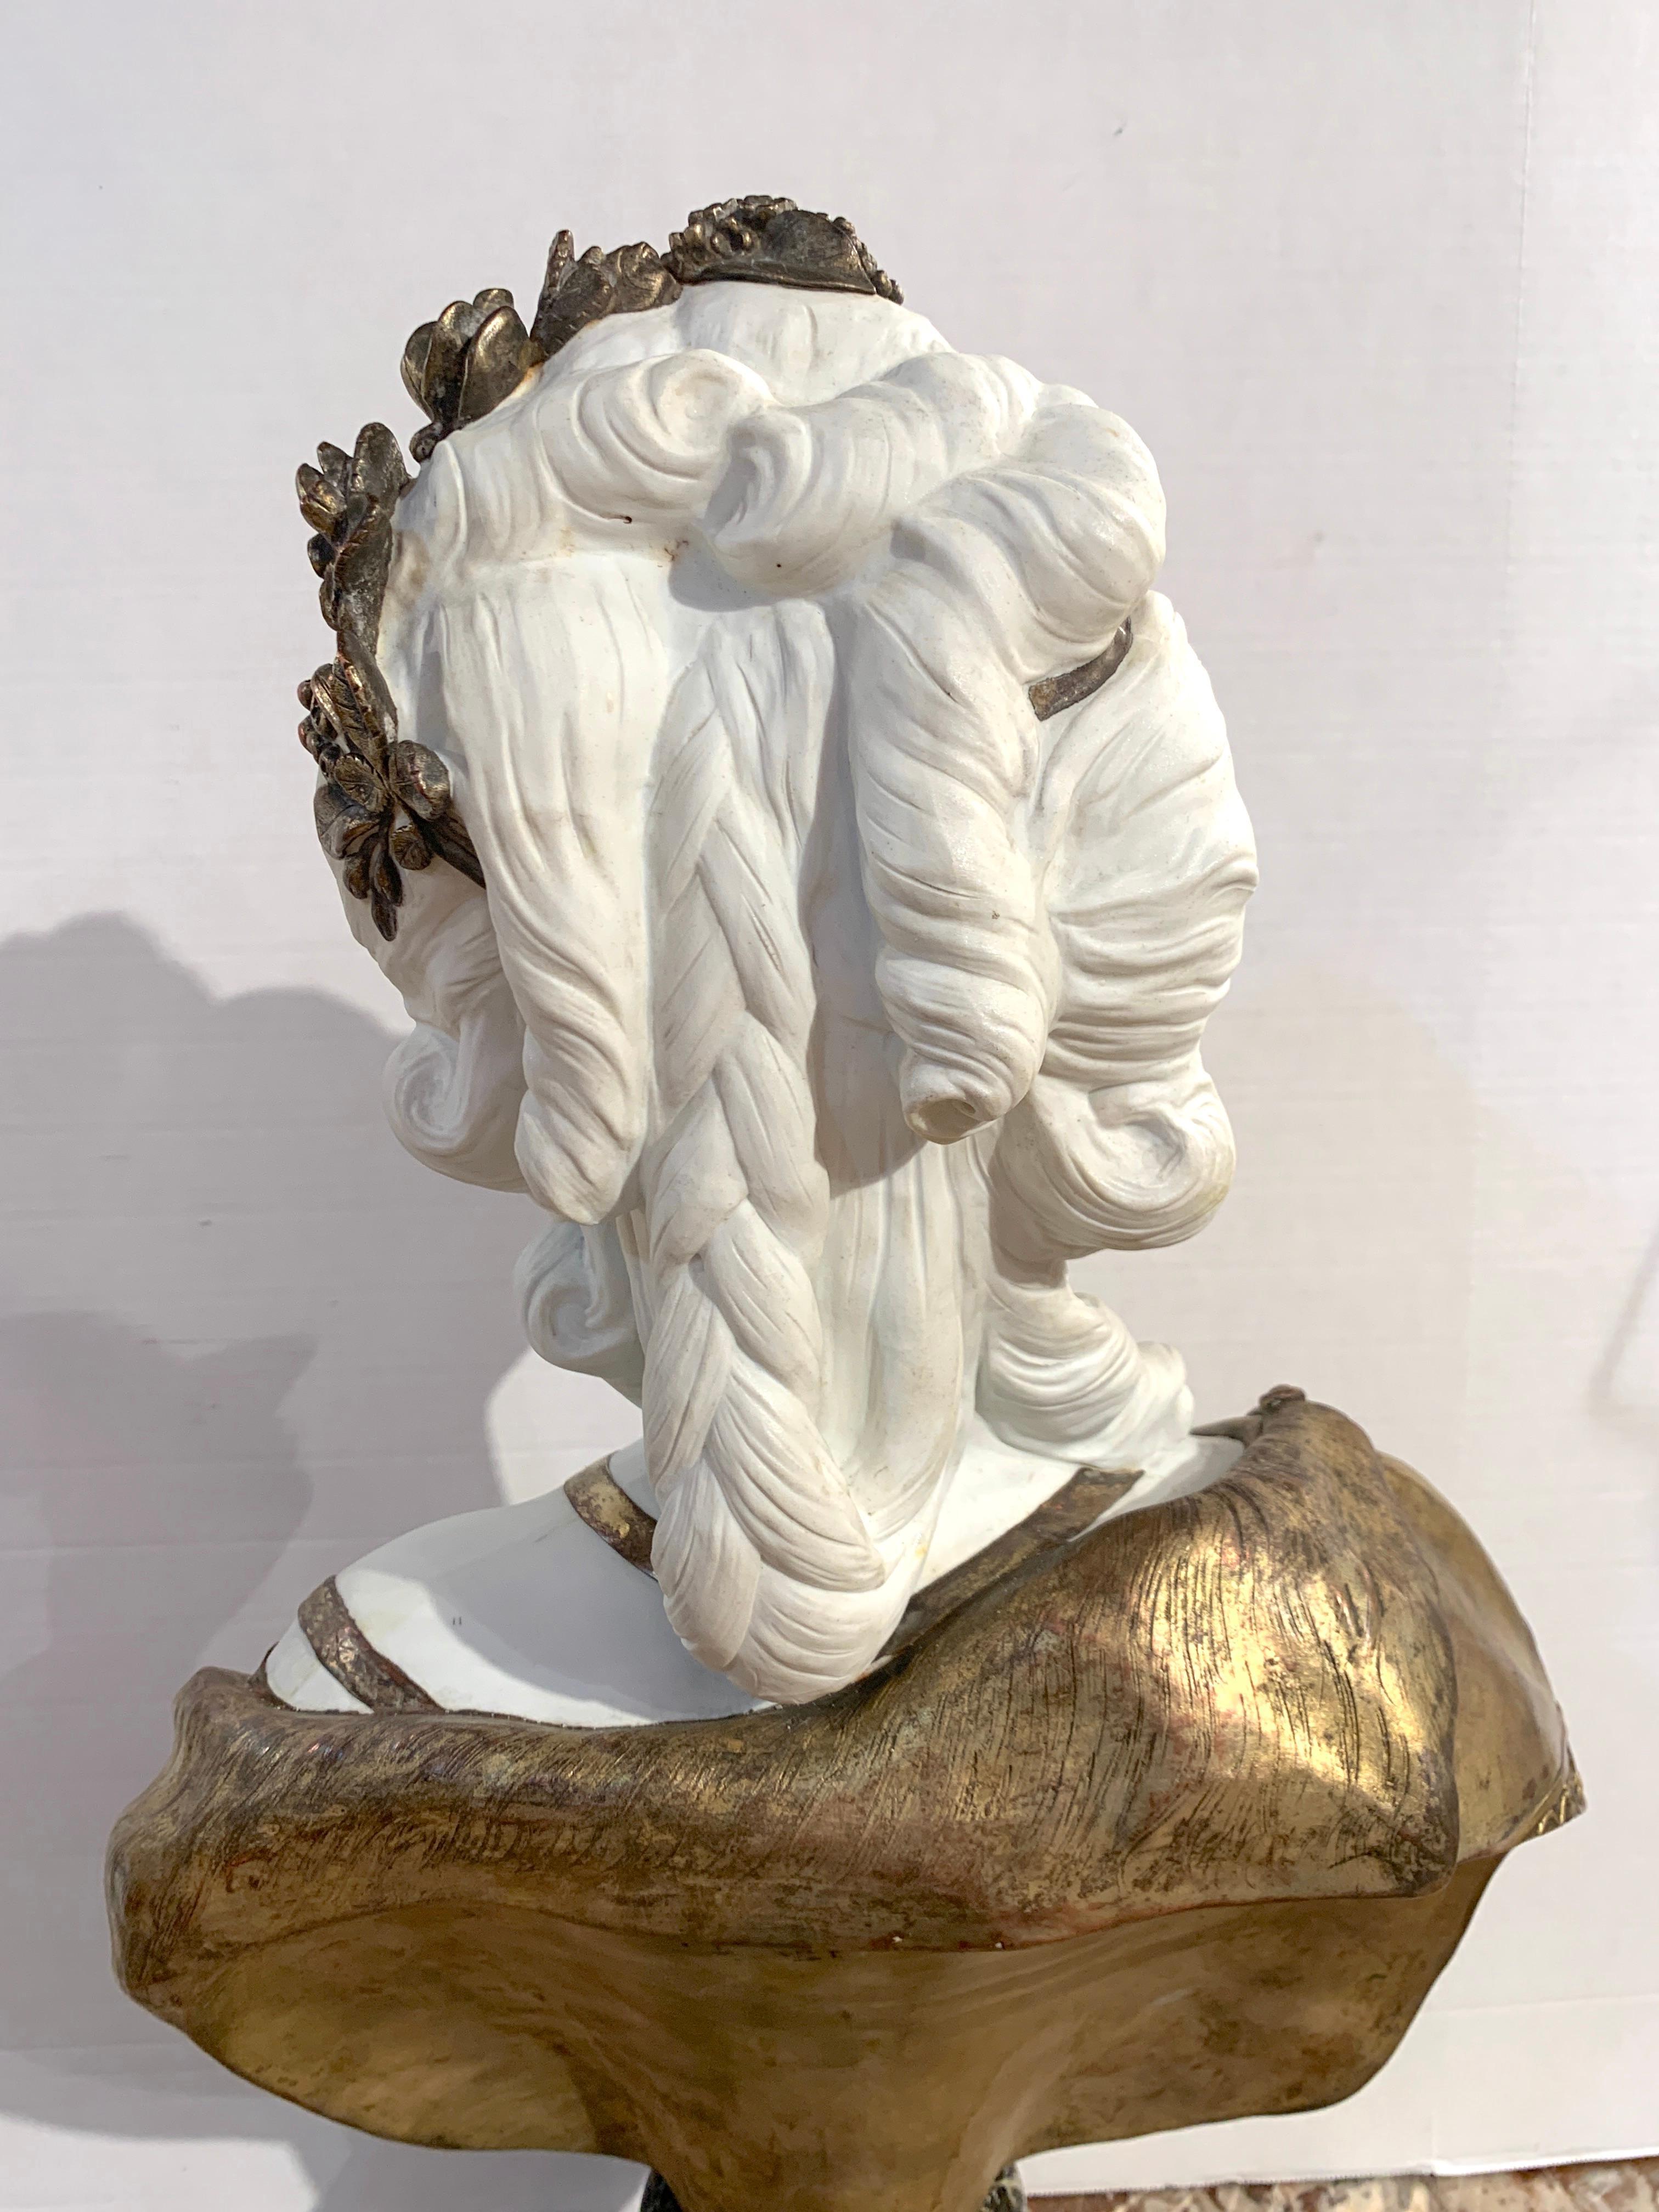 Sèvres Biscuit Porcelain and Ormolu Bust of Marie Antoinette after F. Lecomte For Sale 2